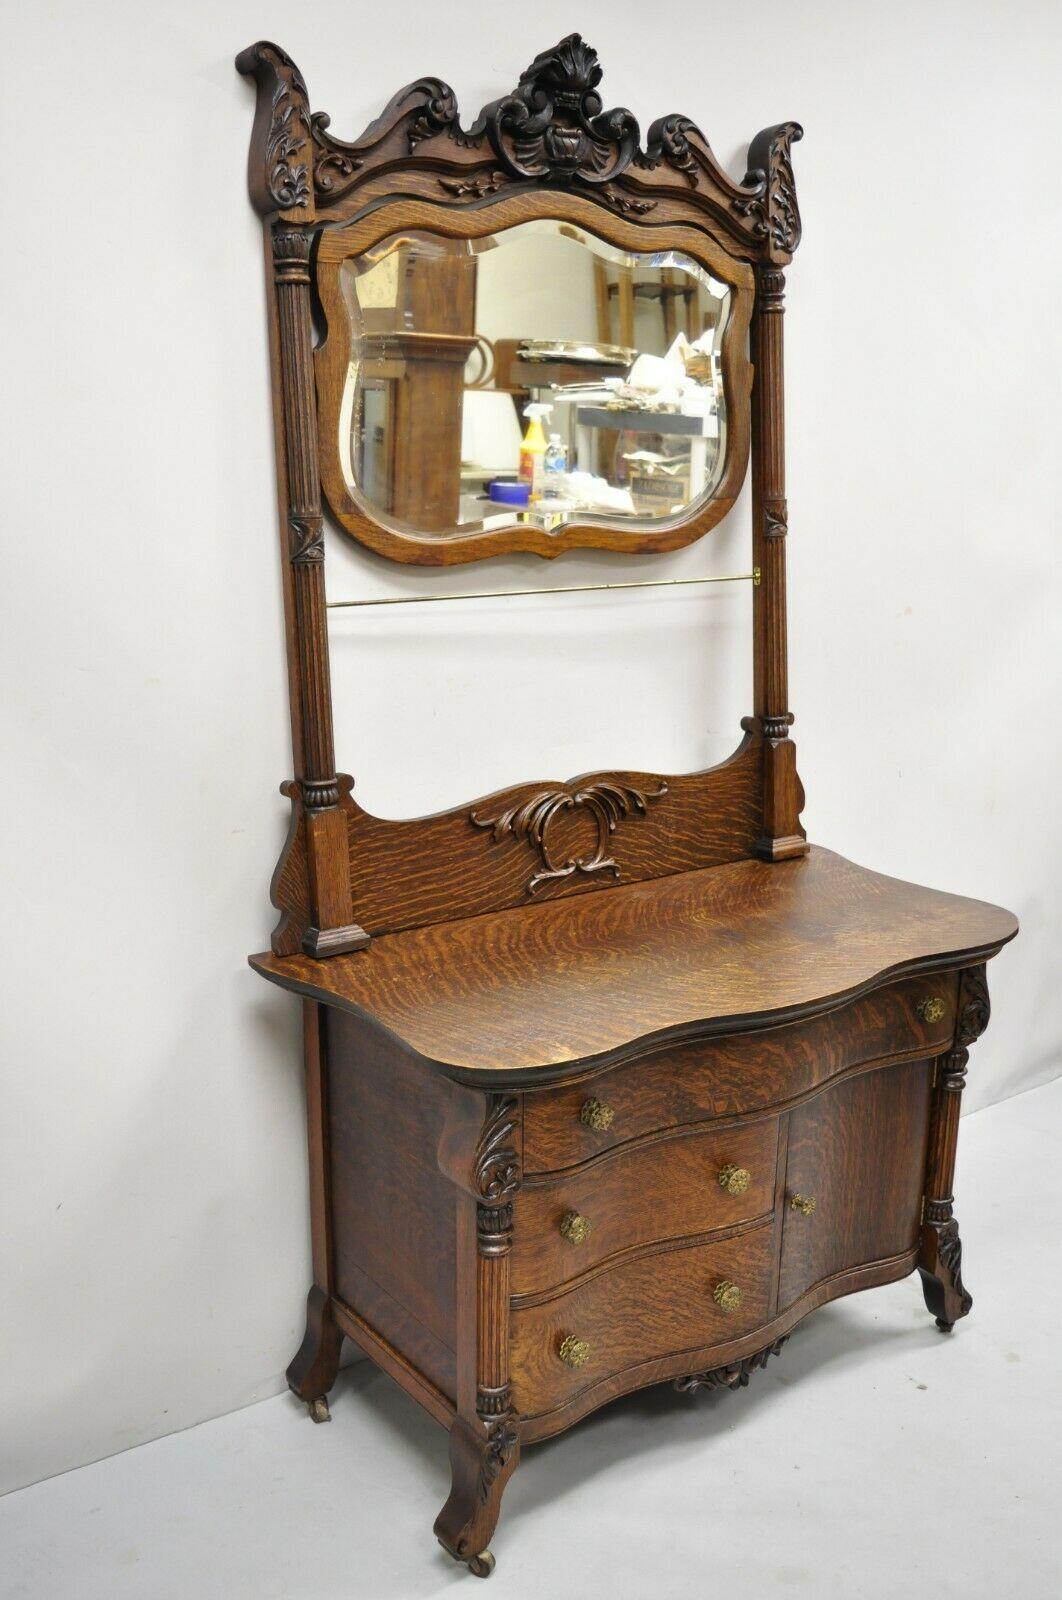 Antique Victorian oak wood washstand princess dresser vanity with shaving mirror. Item features rolling casters, serpentine front, beautiful wood grain, nicely carved details, 1 swing door, 3 drawers, solid brass hardware, very nice antique item,